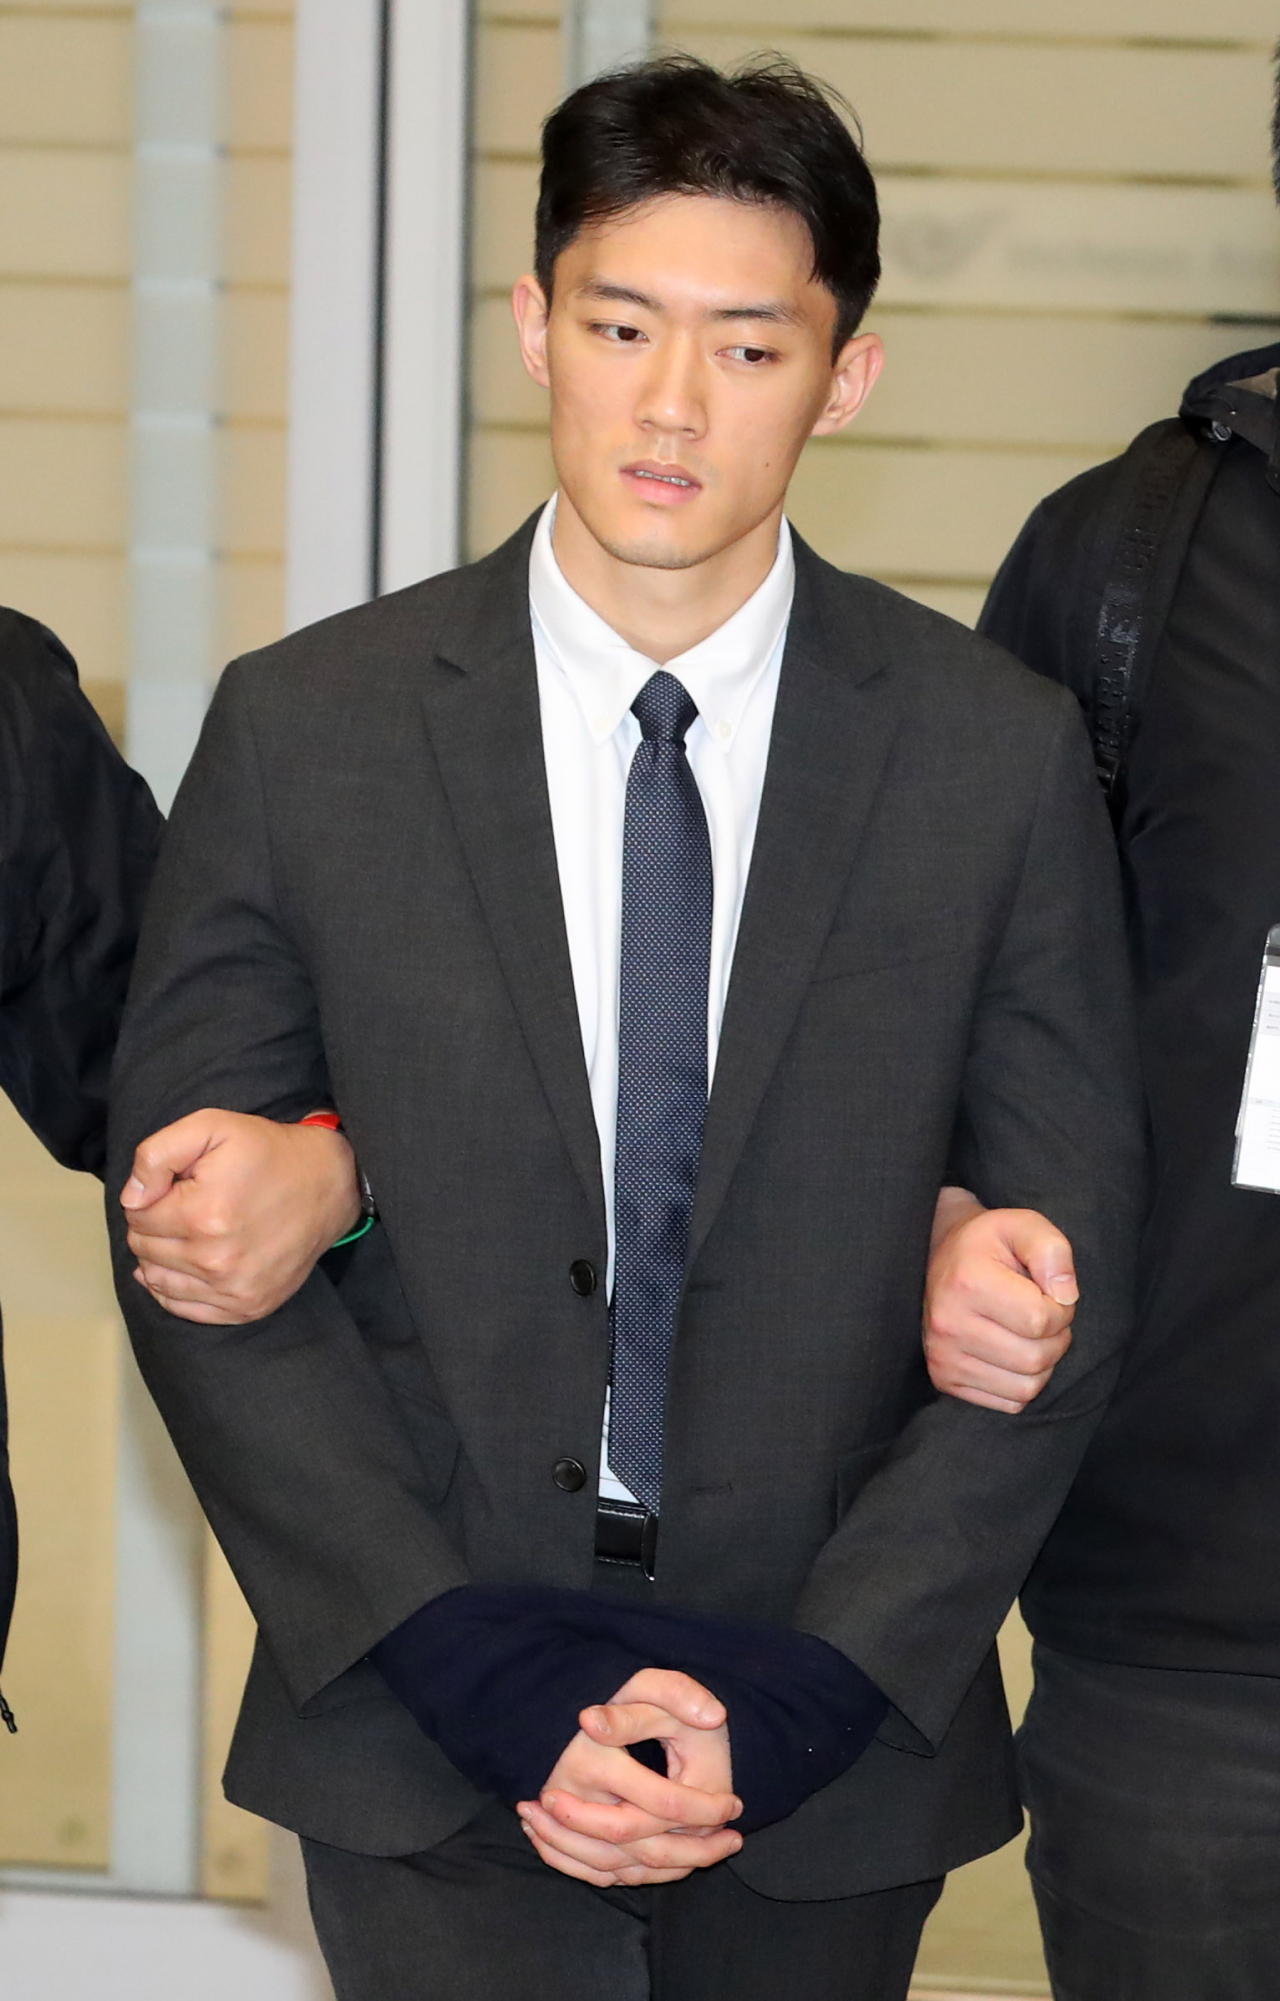 Chun Woo-won, the grandson of former President Chun Doo-hwan, was arrested on suspicion of illegal drug use upon arriving at the Incheon International Airport on March 28. He was released from police custody the following day and visited Gwangju on March 30 as part of his self-imposed quest to apologize for his grandfather's crimes. (Lee Sang-sub/The Korea Herald)